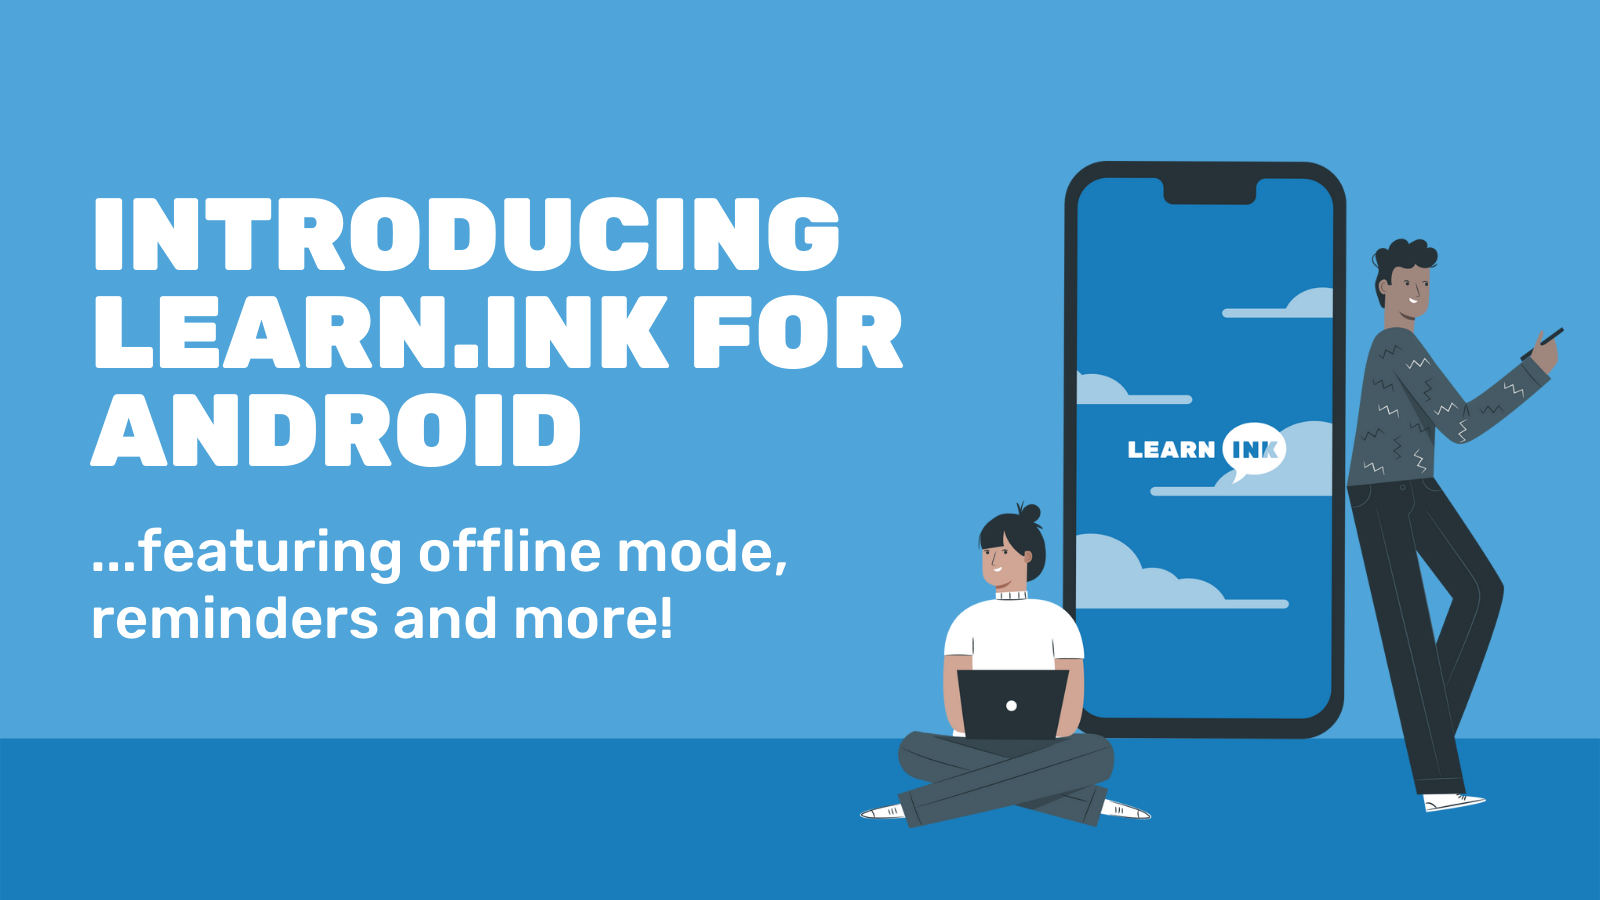 Introducing Learn.ink for Android